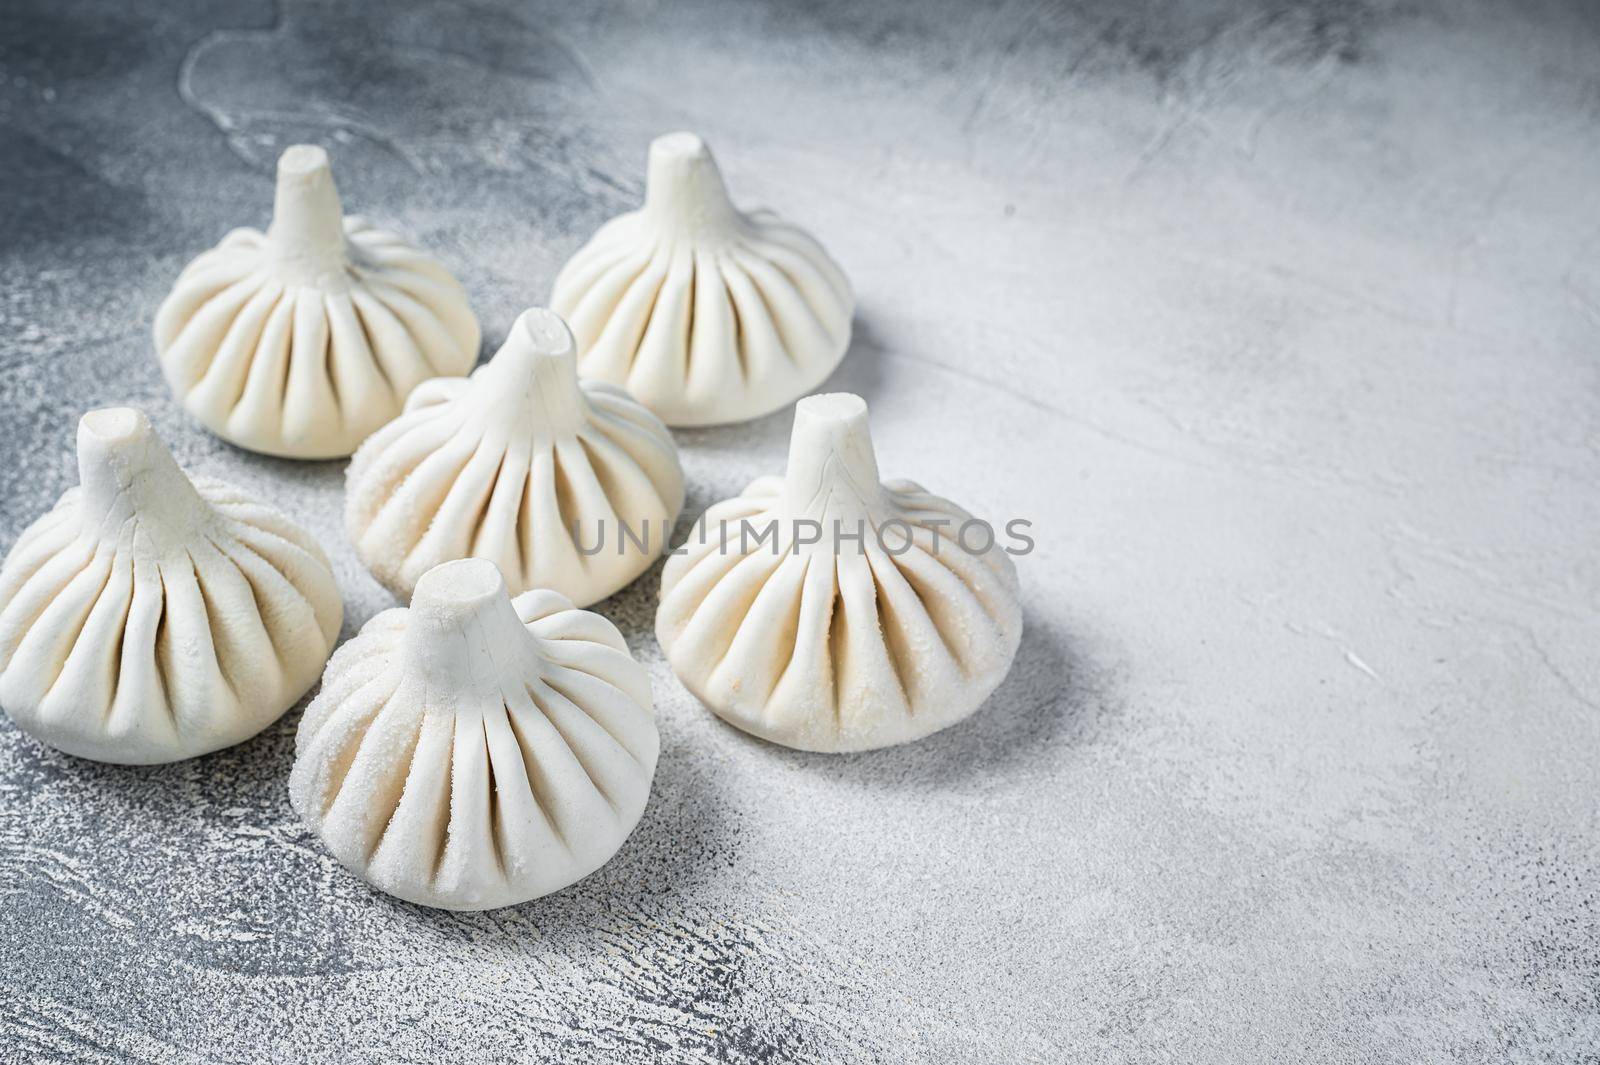 Georgian Raw dumpling Khinkali with meat. White background. Top view. Copy space.